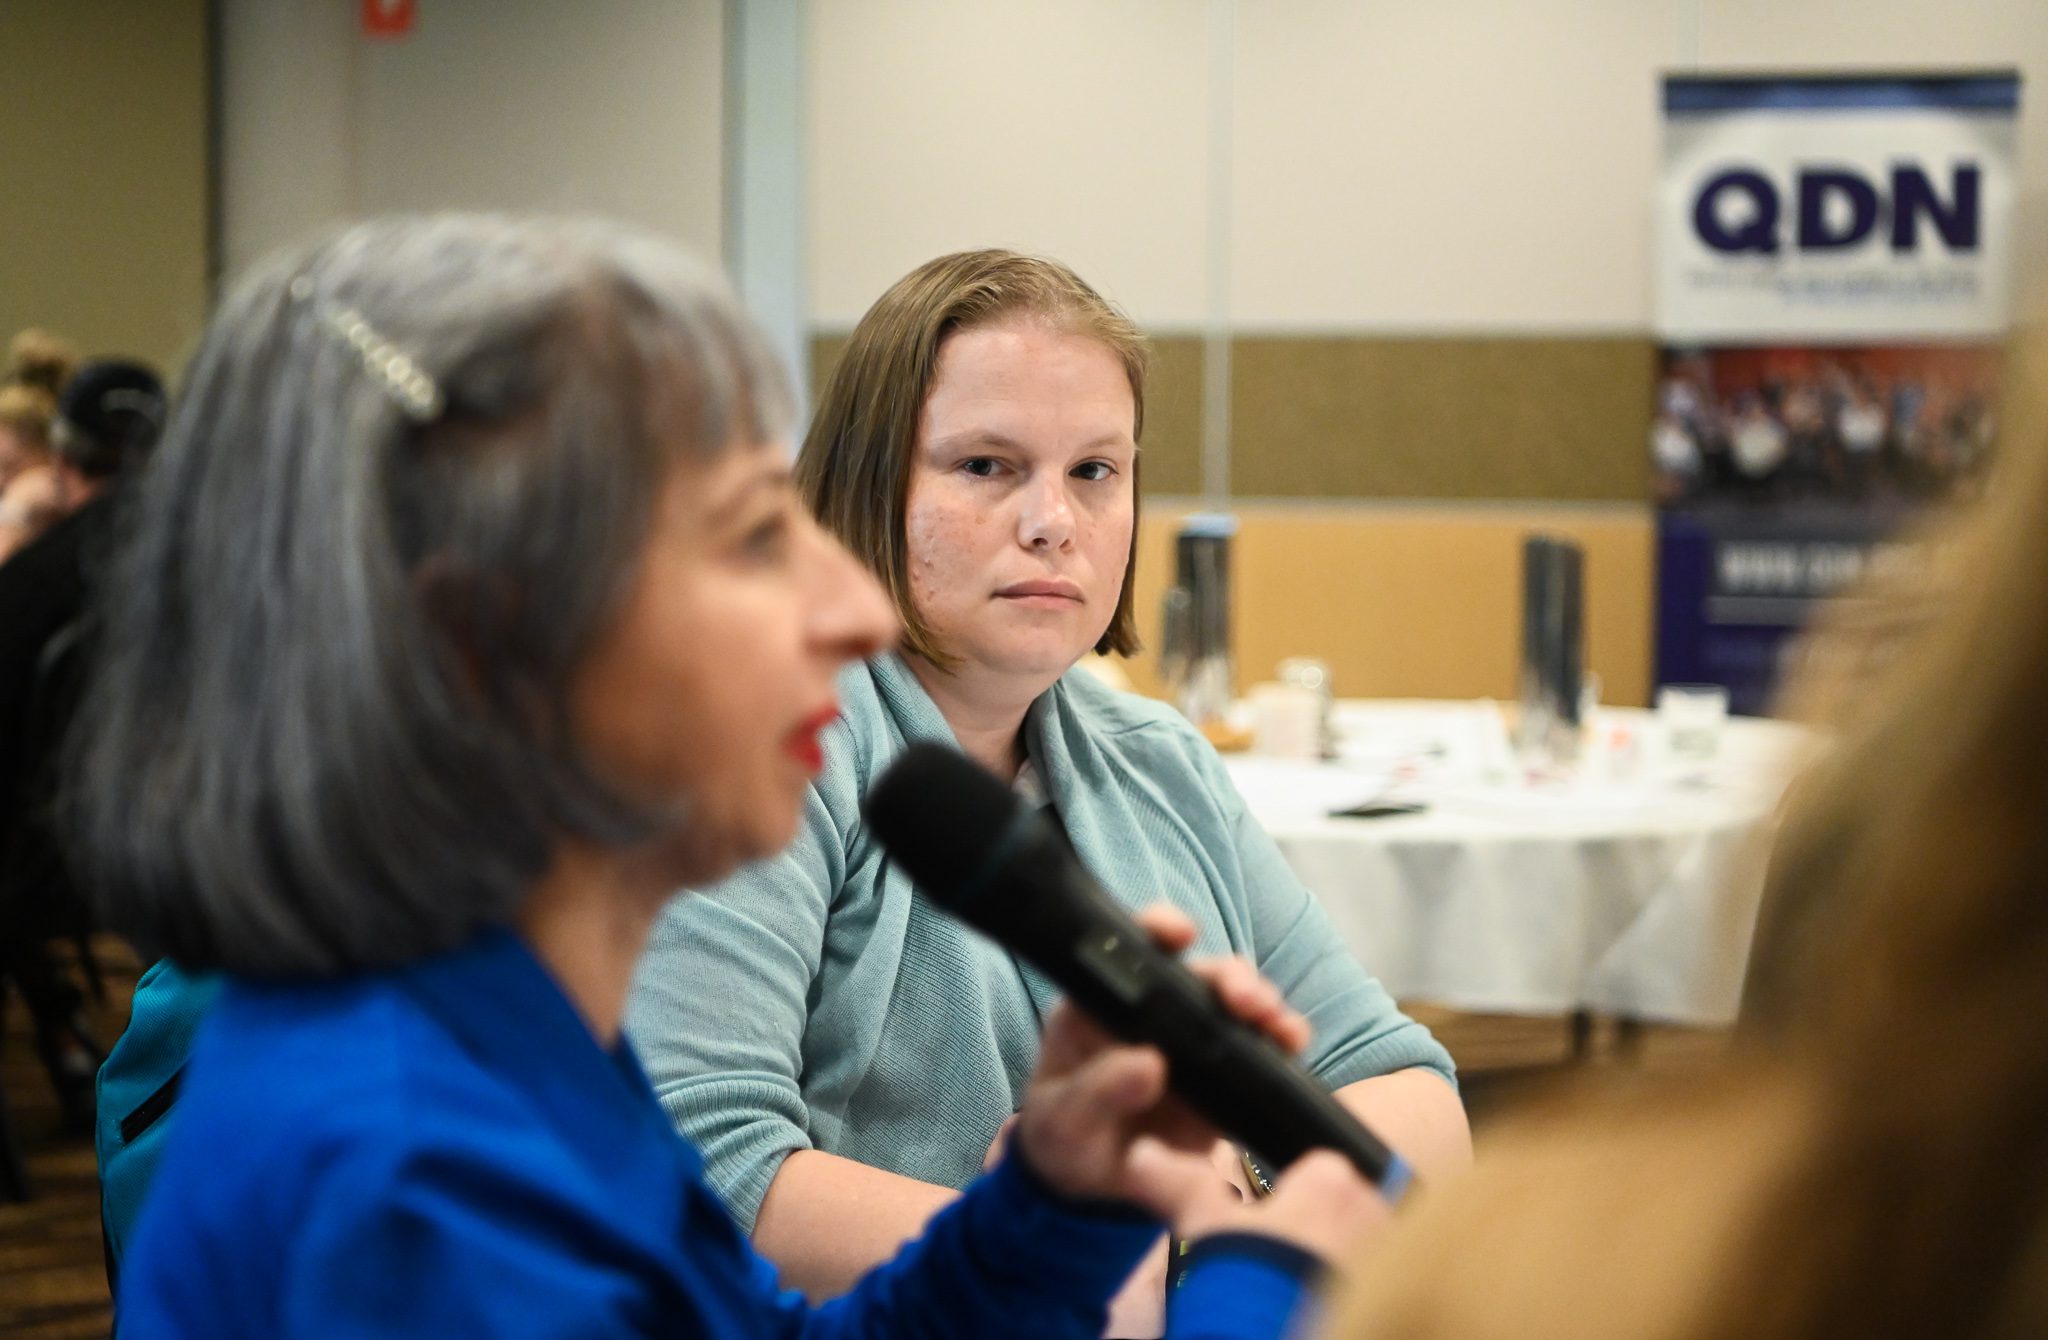 Two women, the one in the foreground is out of focus but she is holding a microphone. The woman in the background is in focus, she has short light brown hair and wearing a light blue long sleeved shirt.